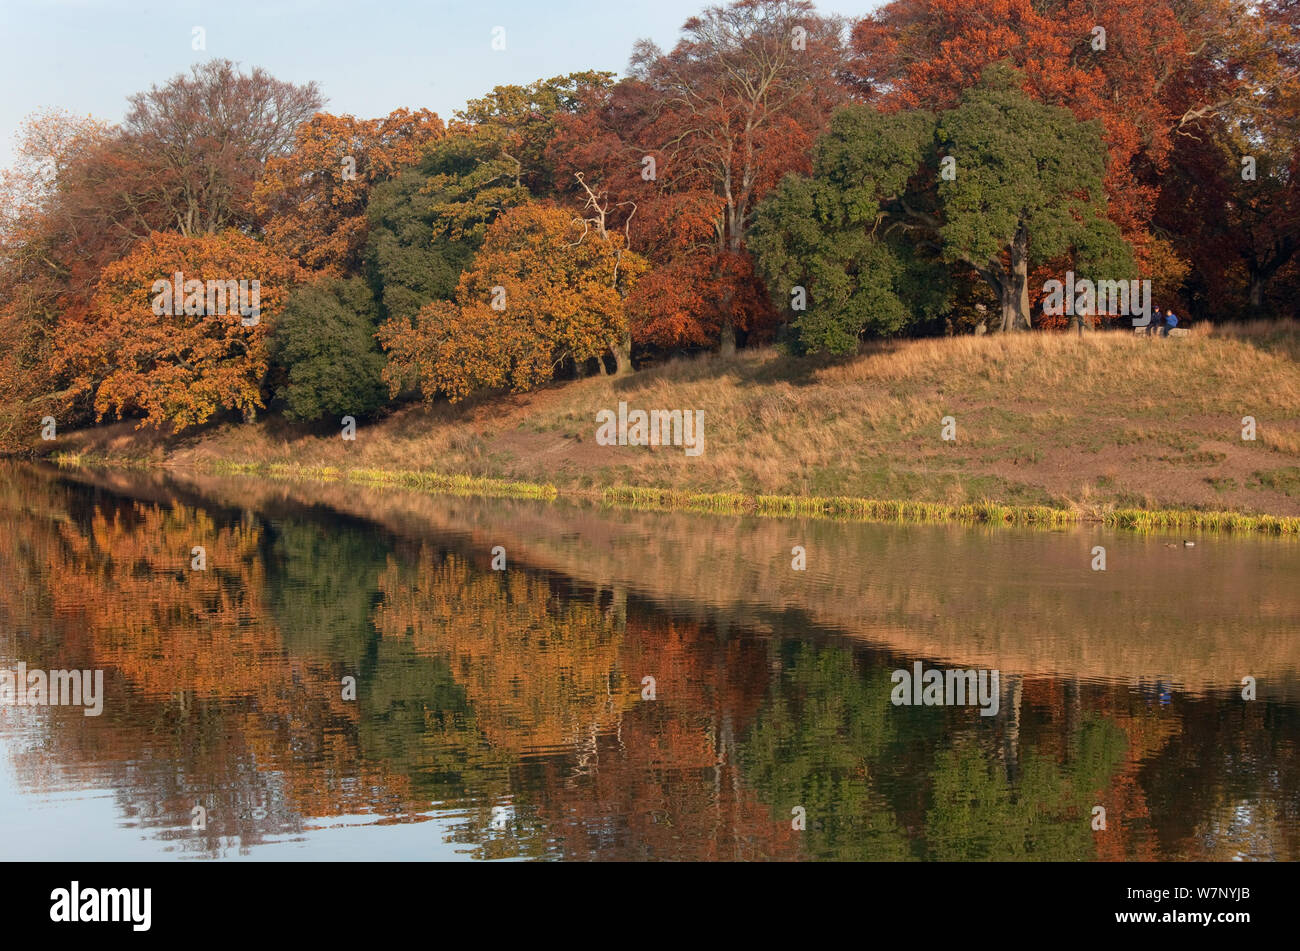 Trees reflectioned in lake at Holkham Park, with people sitting on tree trunk, Norfolk, UK, November Stock Photo